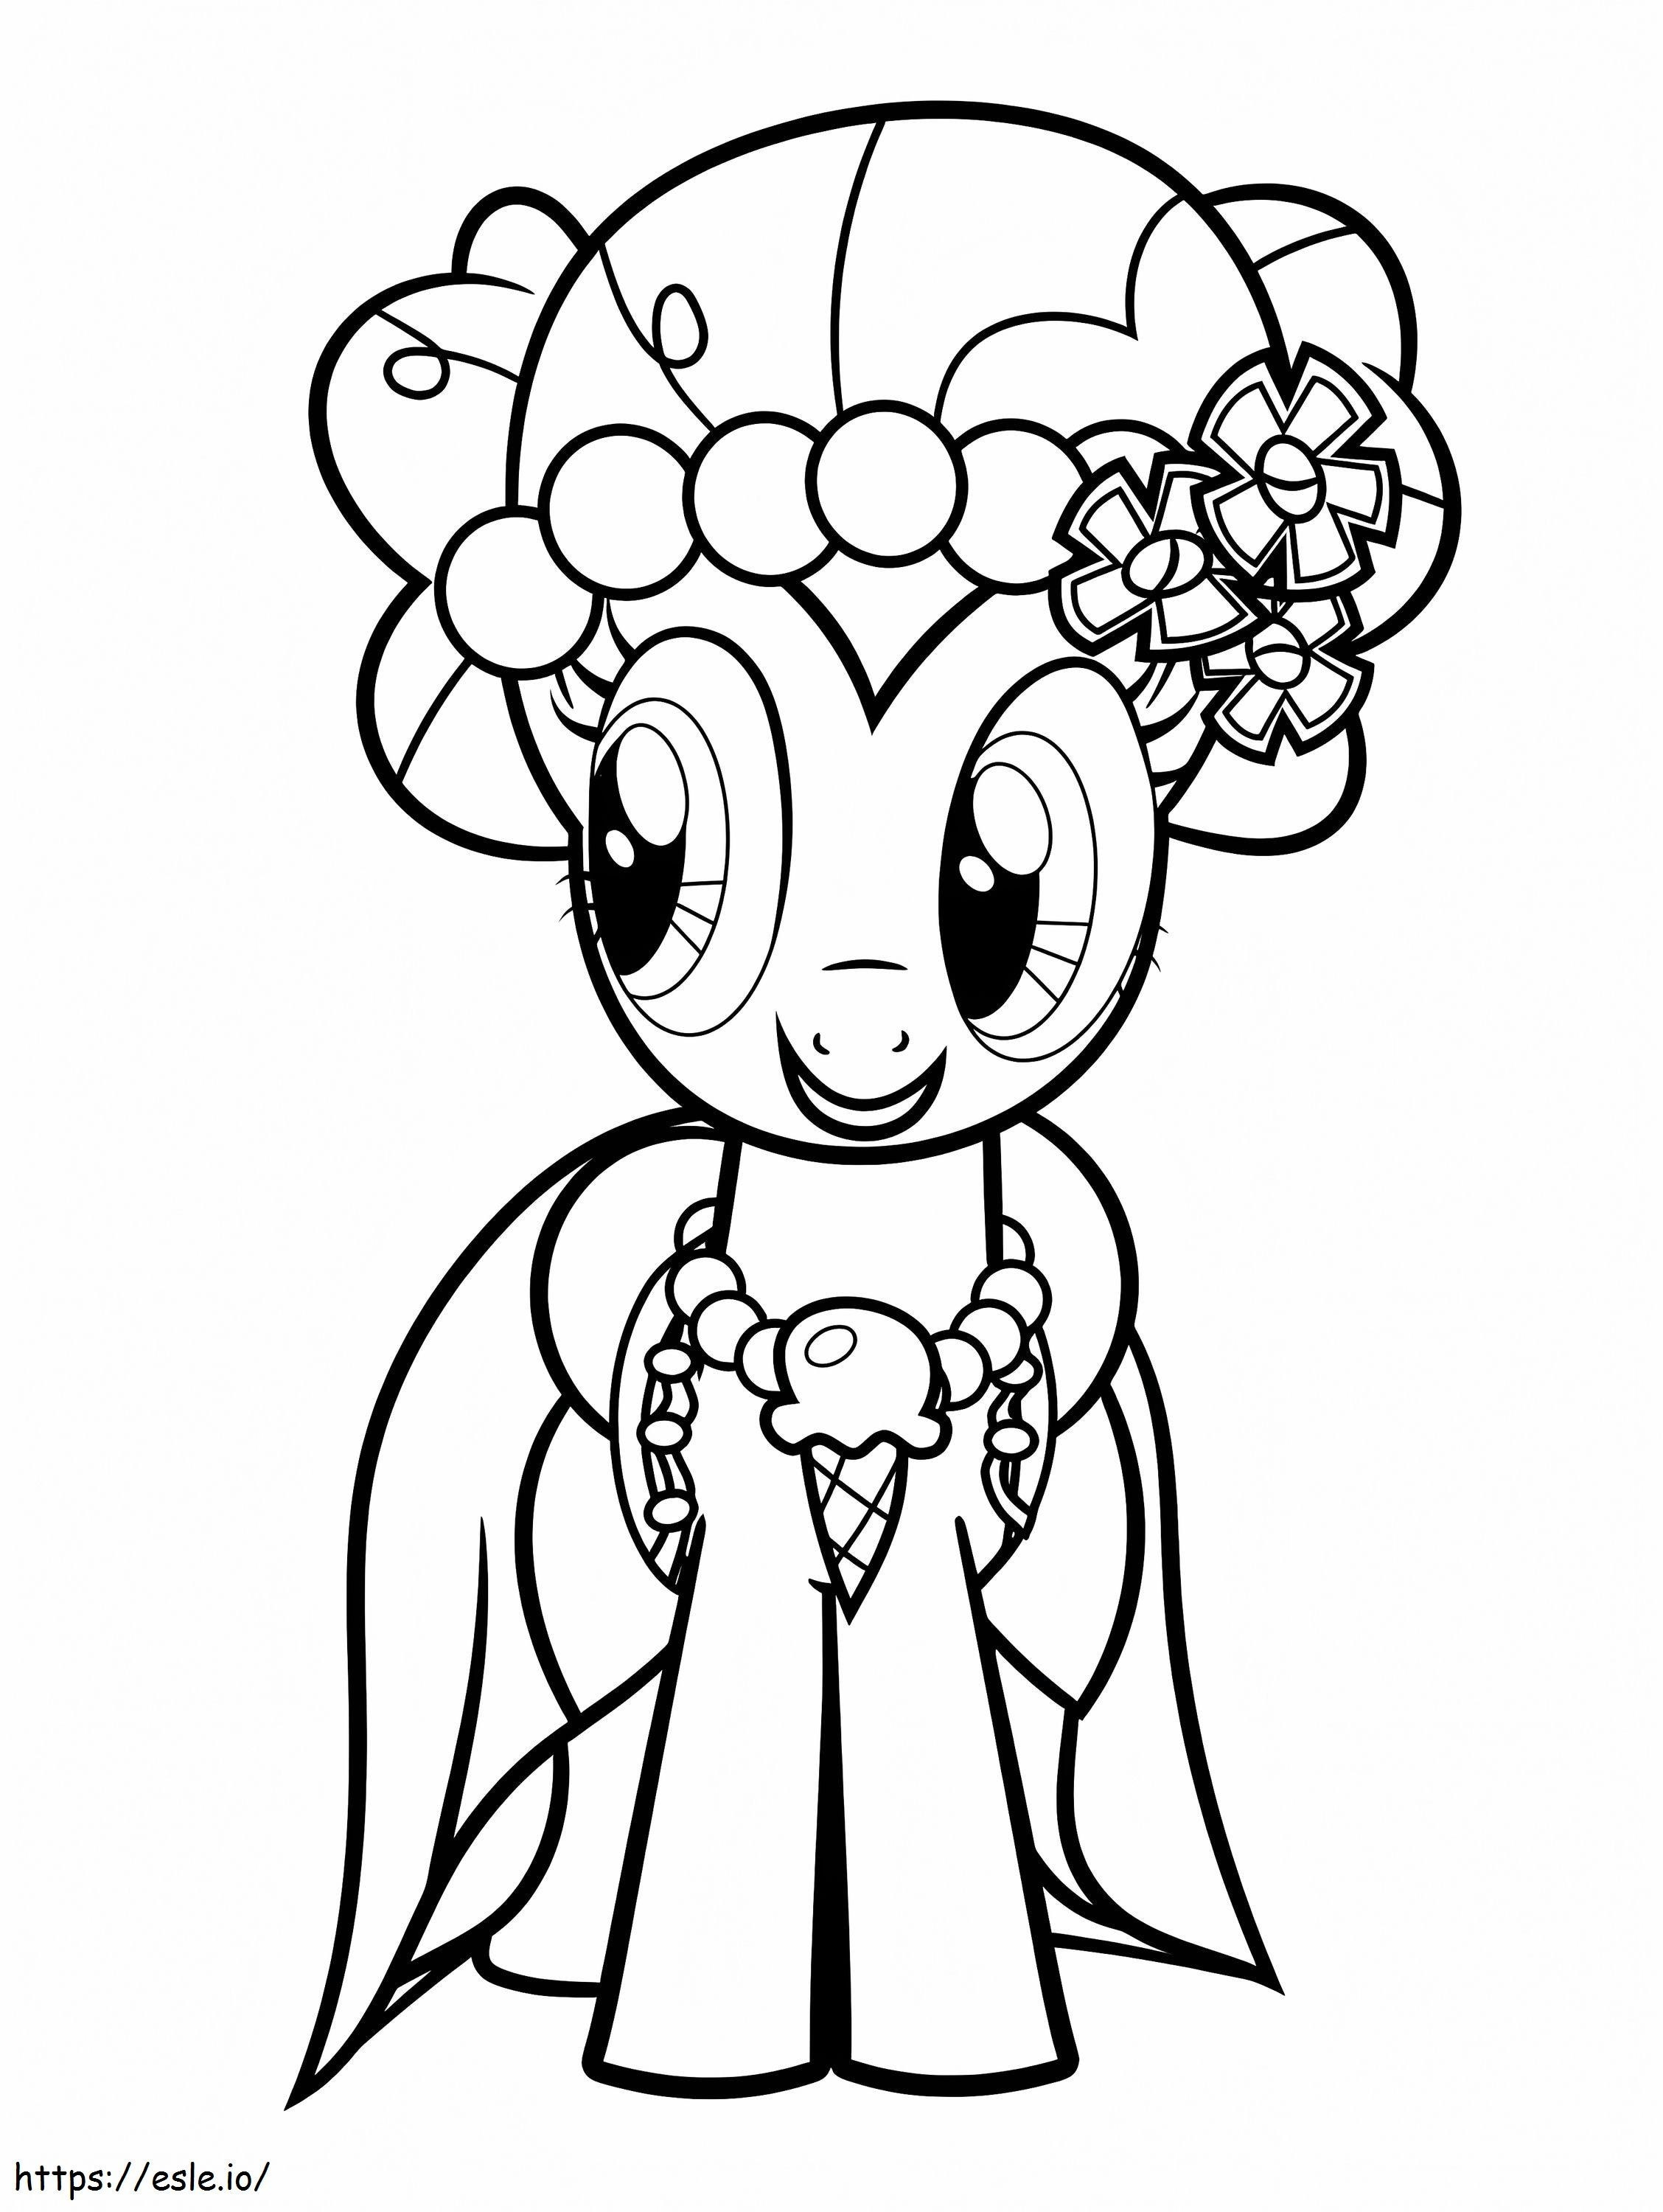 Dressy Pinkie Pie coloring page